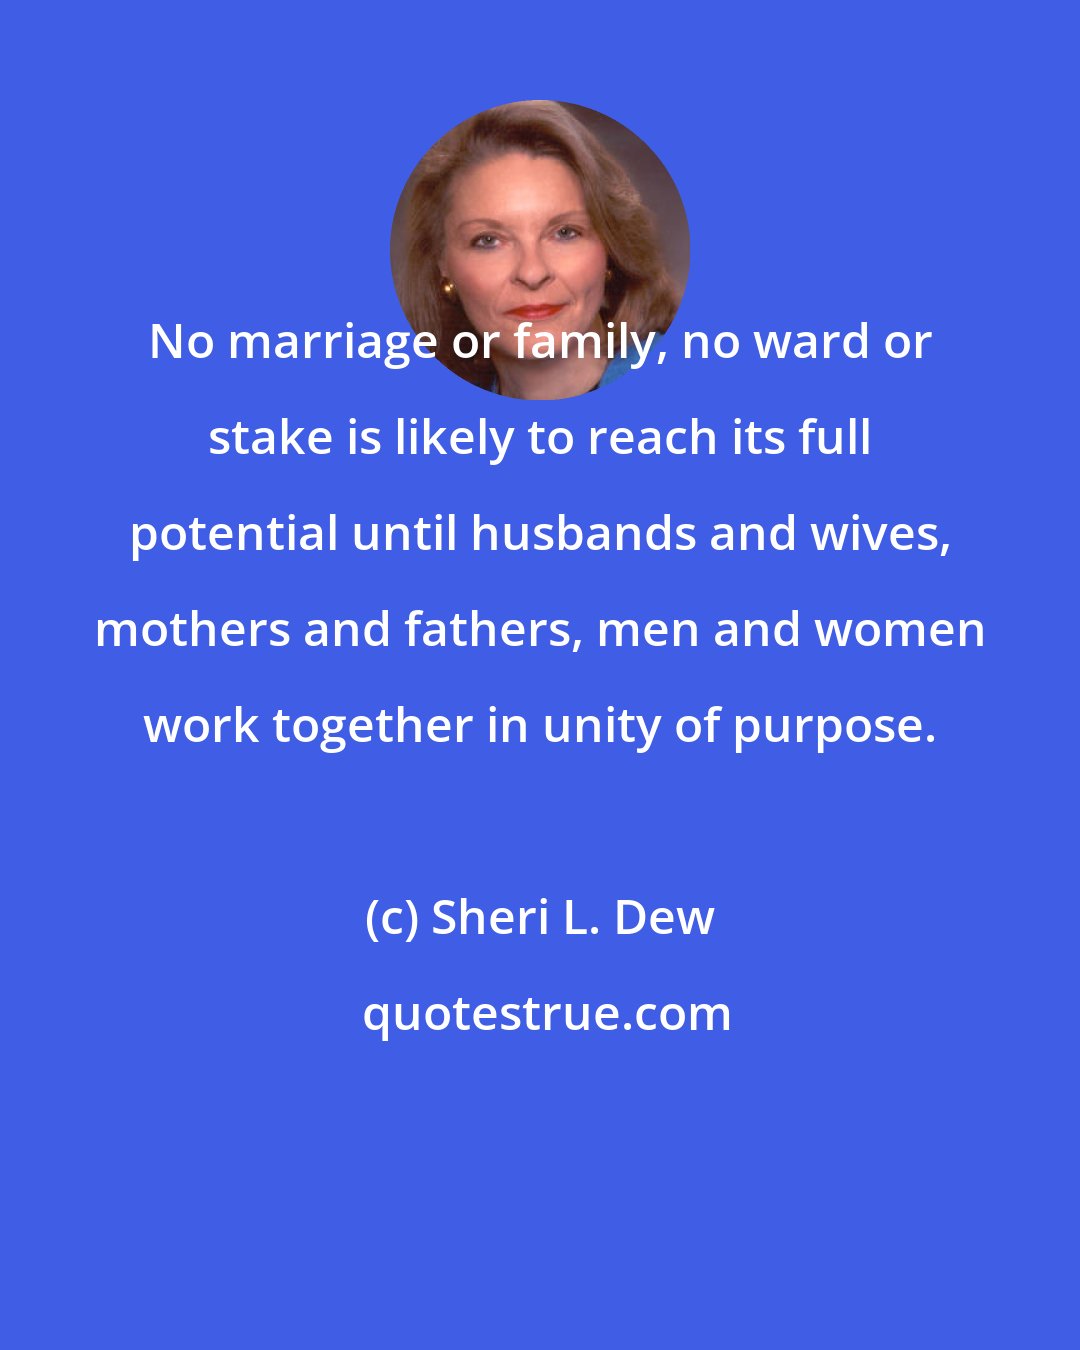 Sheri L. Dew: No marriage or family, no ward or stake is likely to reach its full potential until husbands and wives, mothers and fathers, men and women work together in unity of purpose.